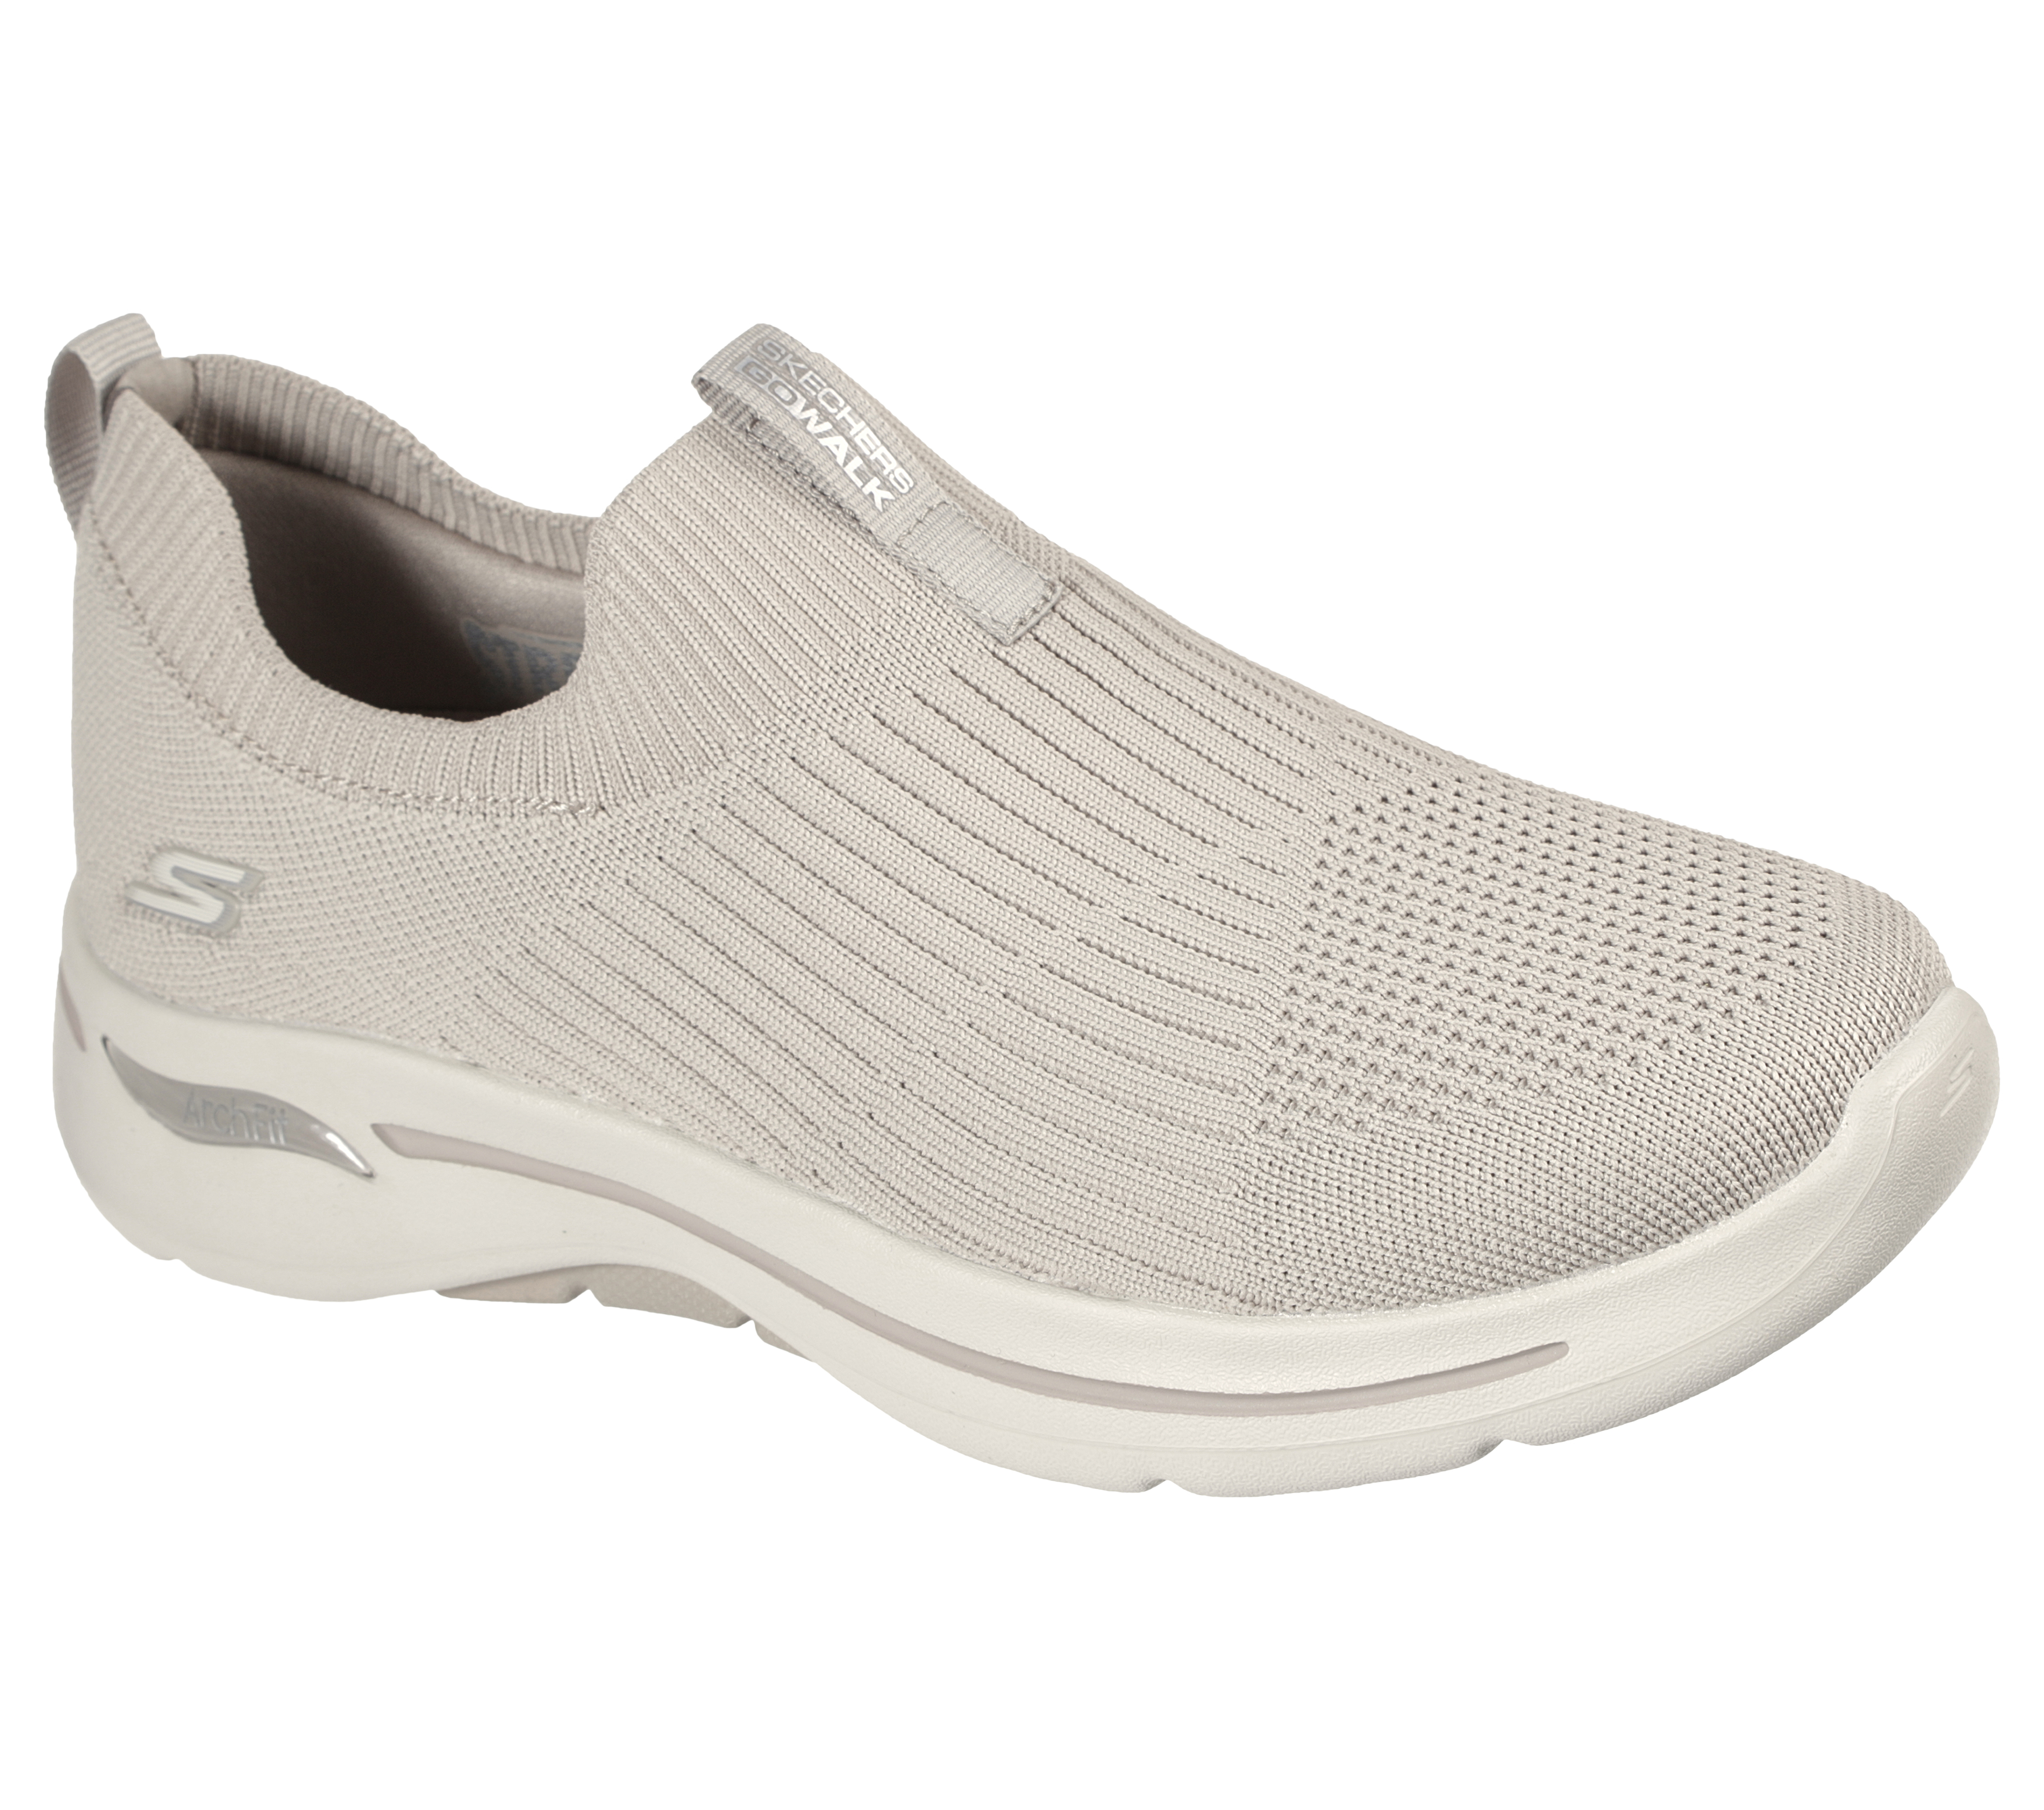 Skechers go walk arch fit - iconic